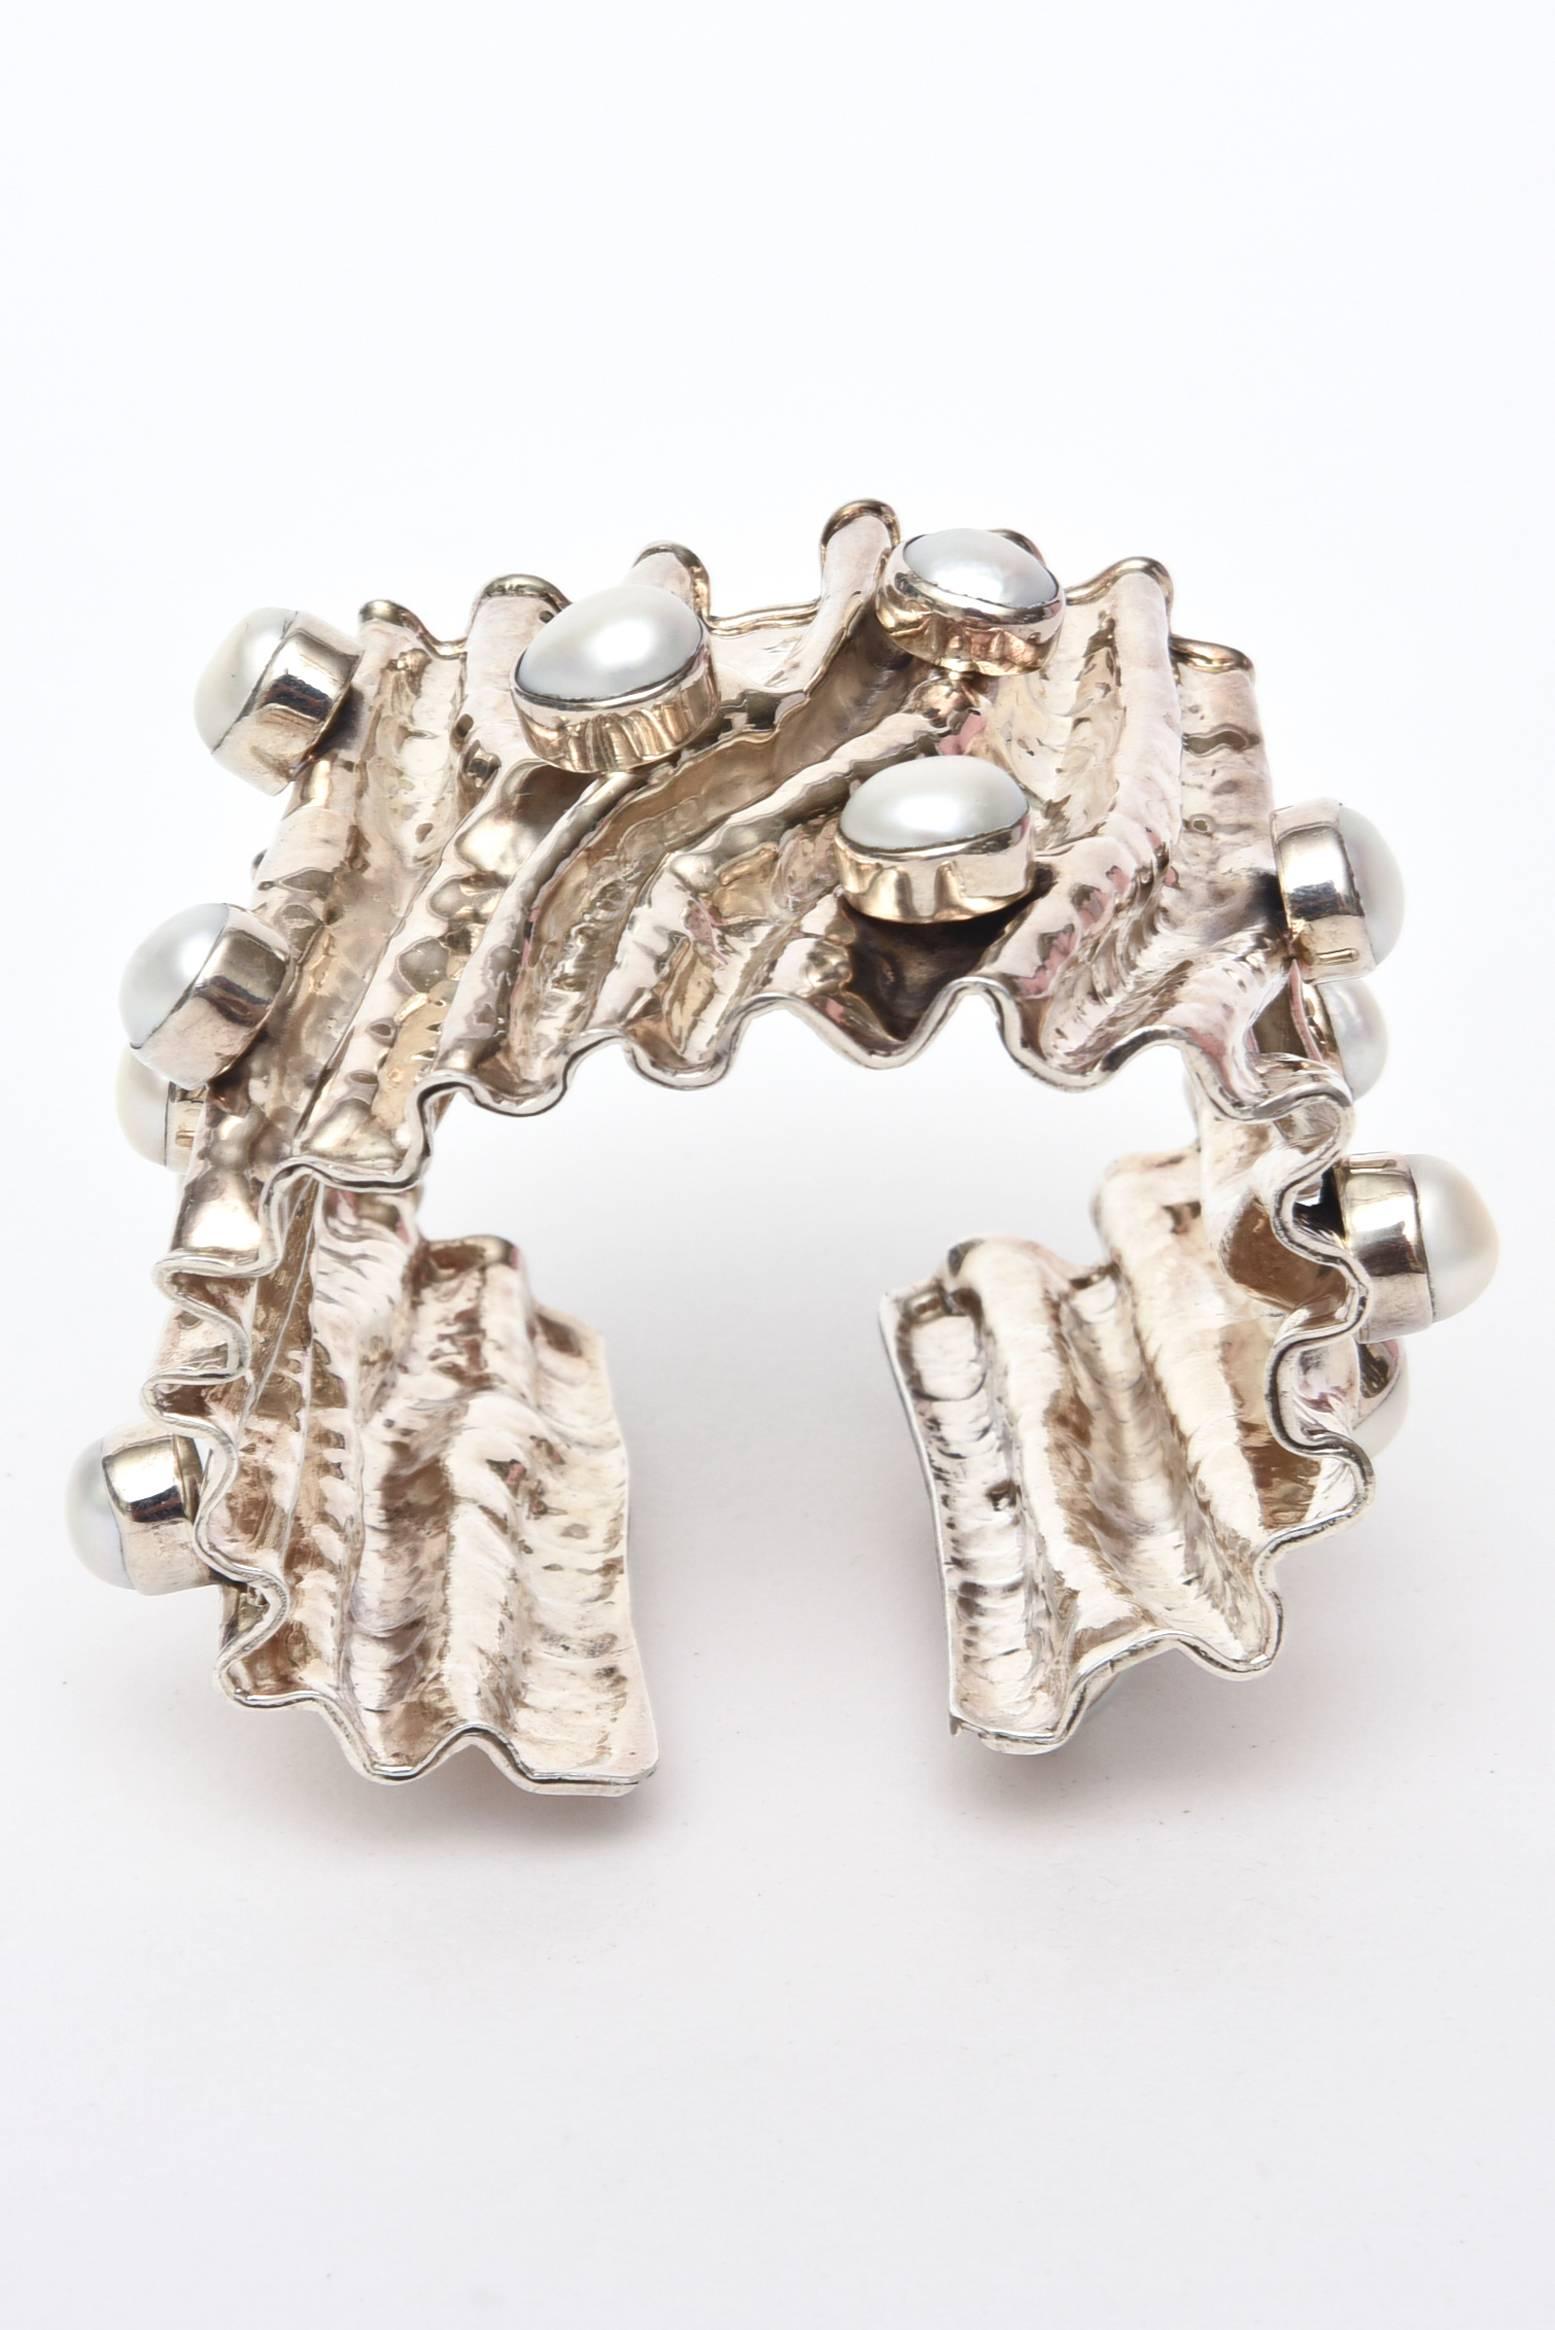 This stunning and sculptural hand wrought sterling silver cuff bracelet has 15 real pearls set in a protruding form, and the silver looks like it has been folded and creased. It has good weight to it. It is marked 